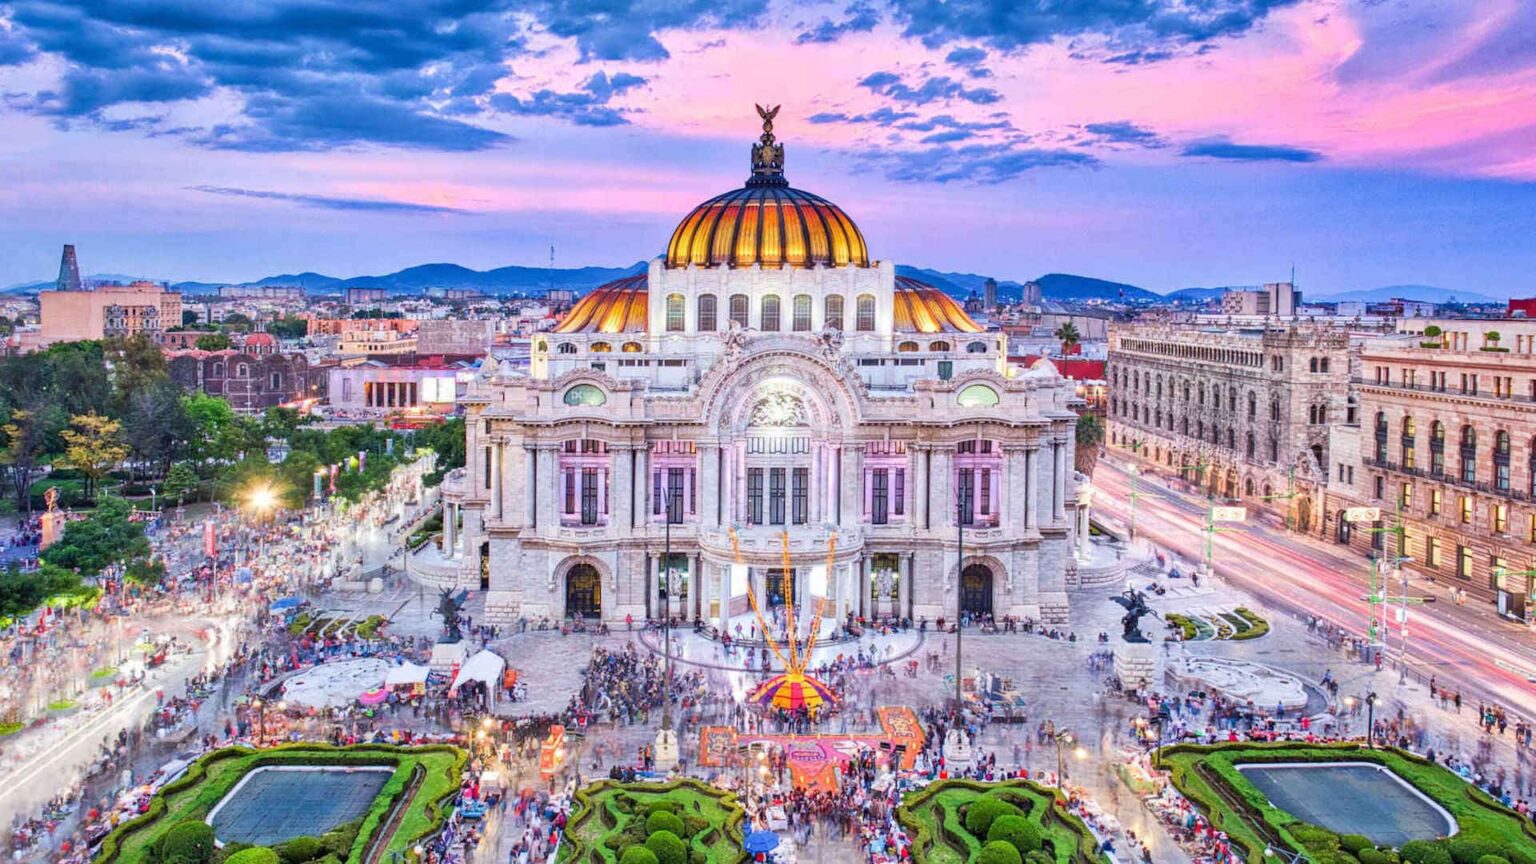 Mexico is a fascinating country that you must travel to at least once in your life, yet it can also be highly complex. Here’s everything you need to know.